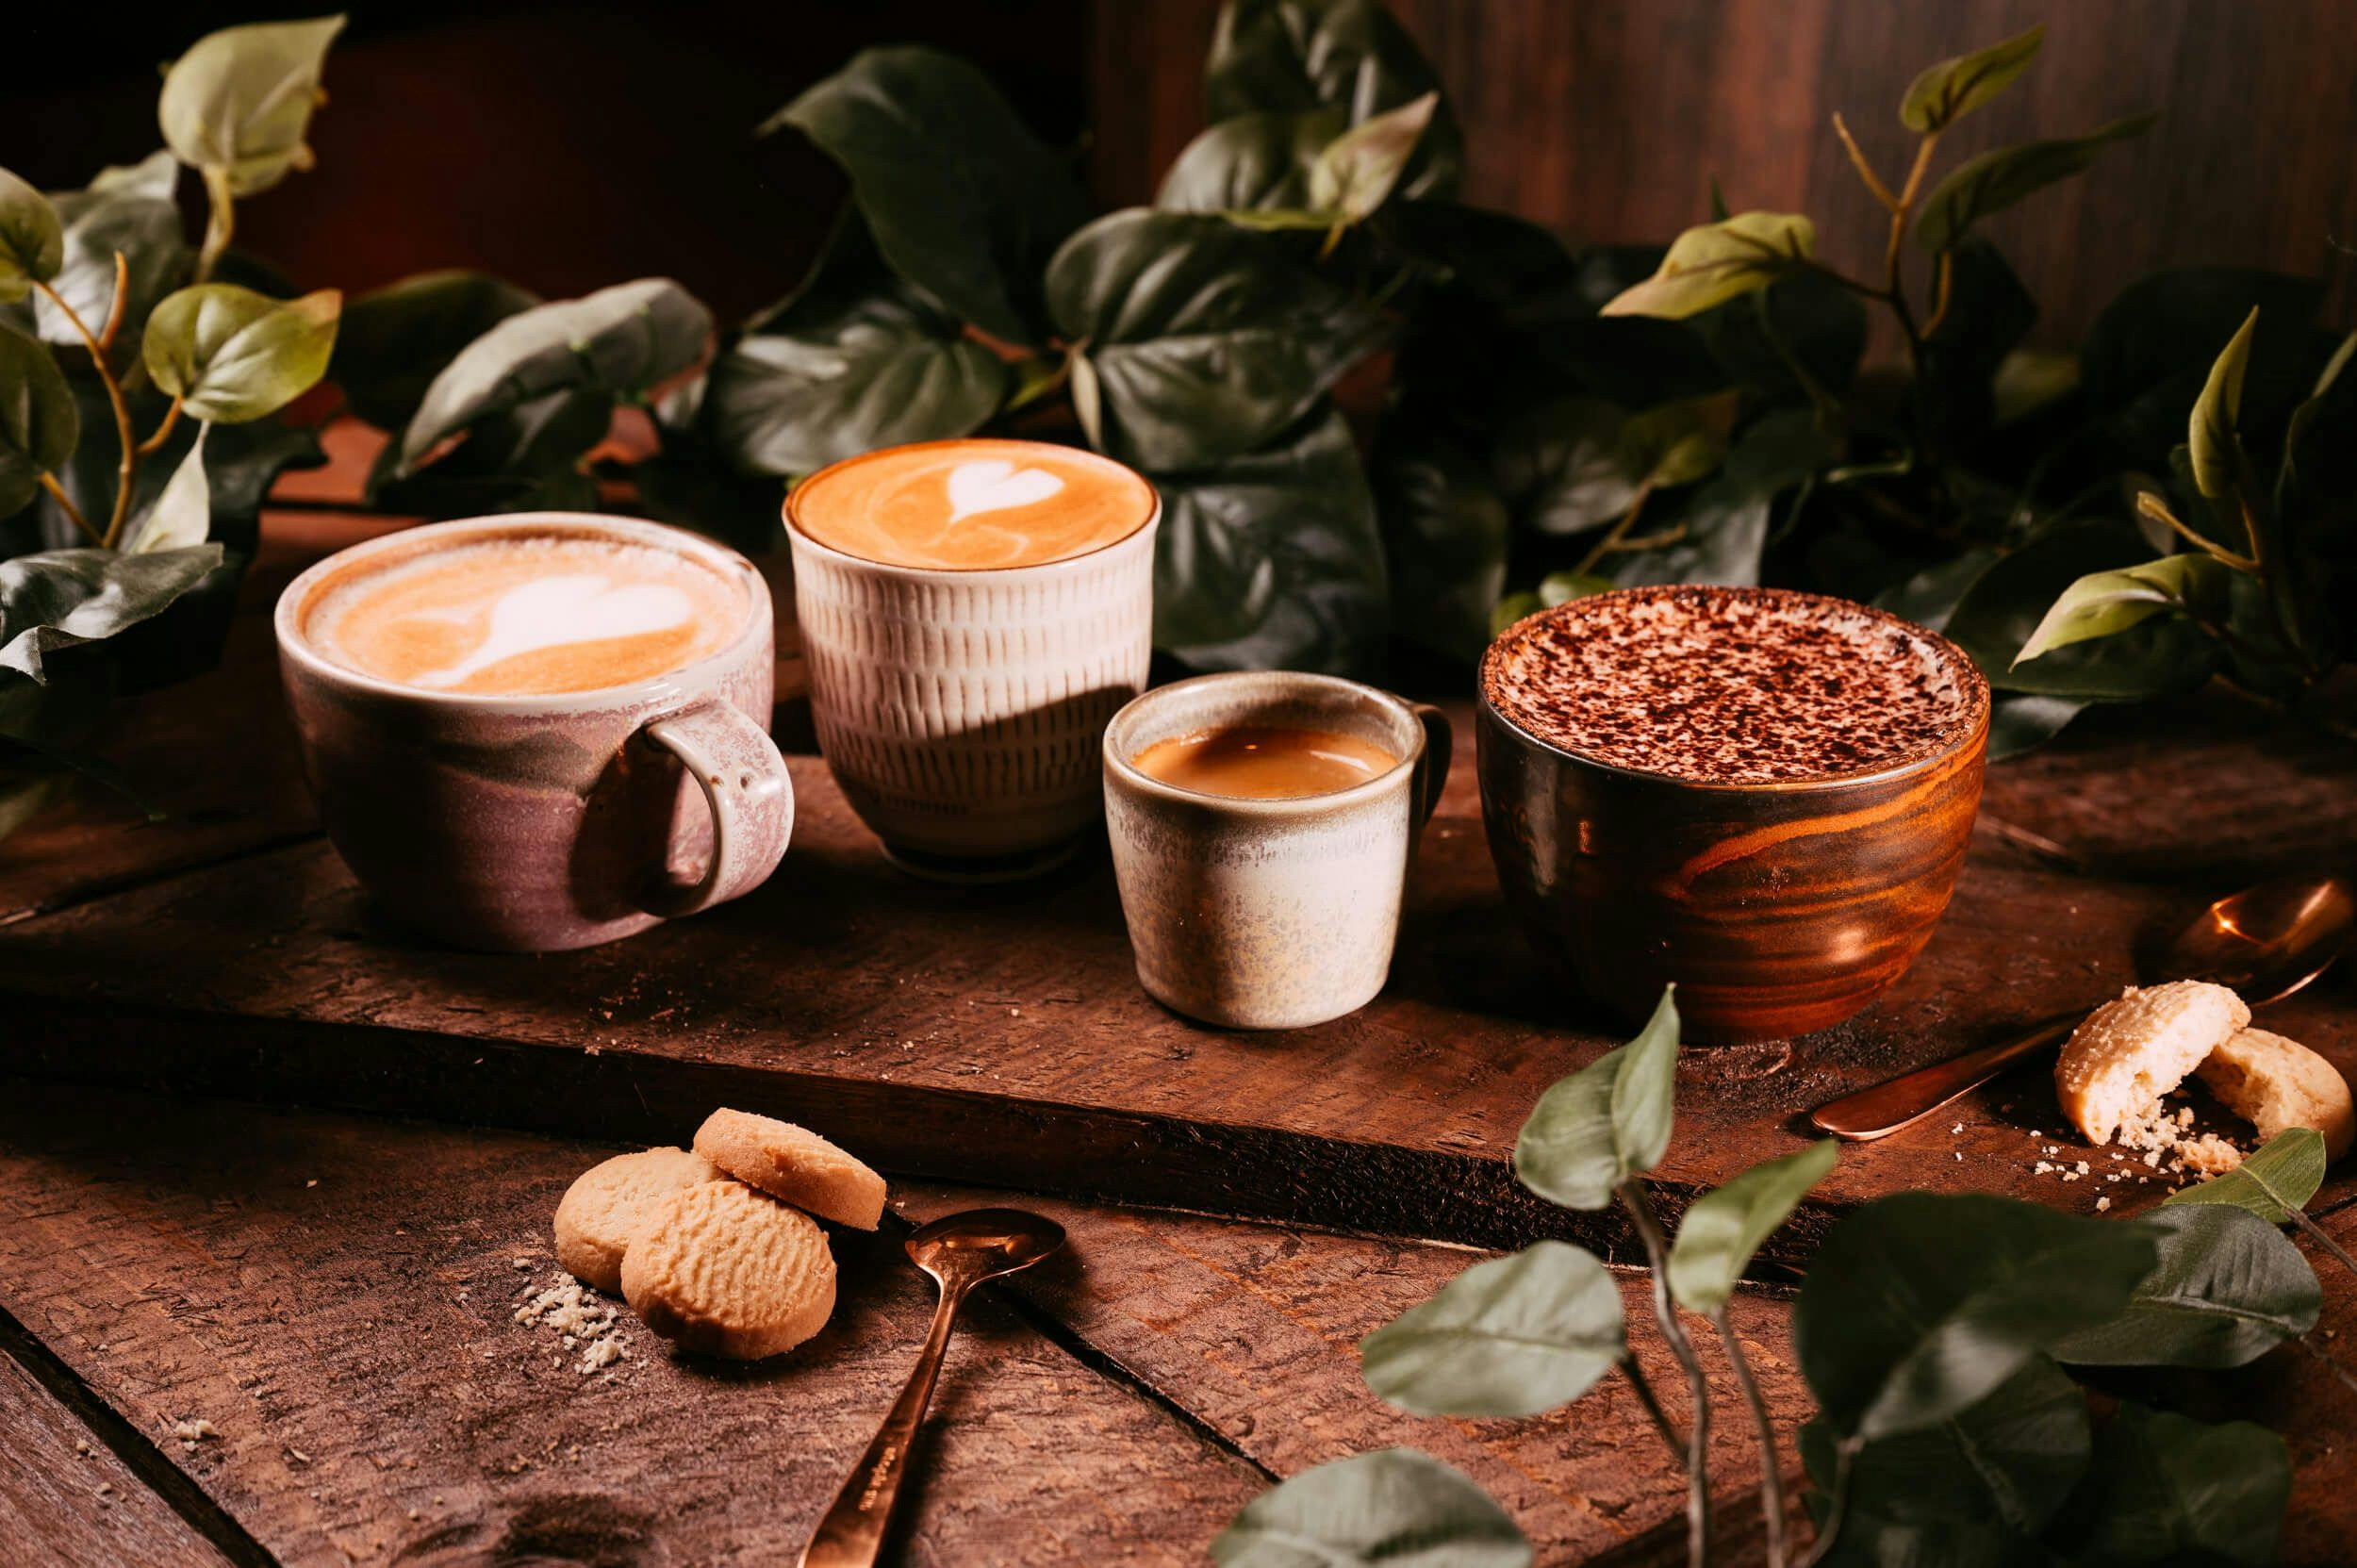 Tray of delicious coffees, including a cappuccino, latte, espresso shot and hot chocolate on a wooden board with biscuits and a spoon next to it.  